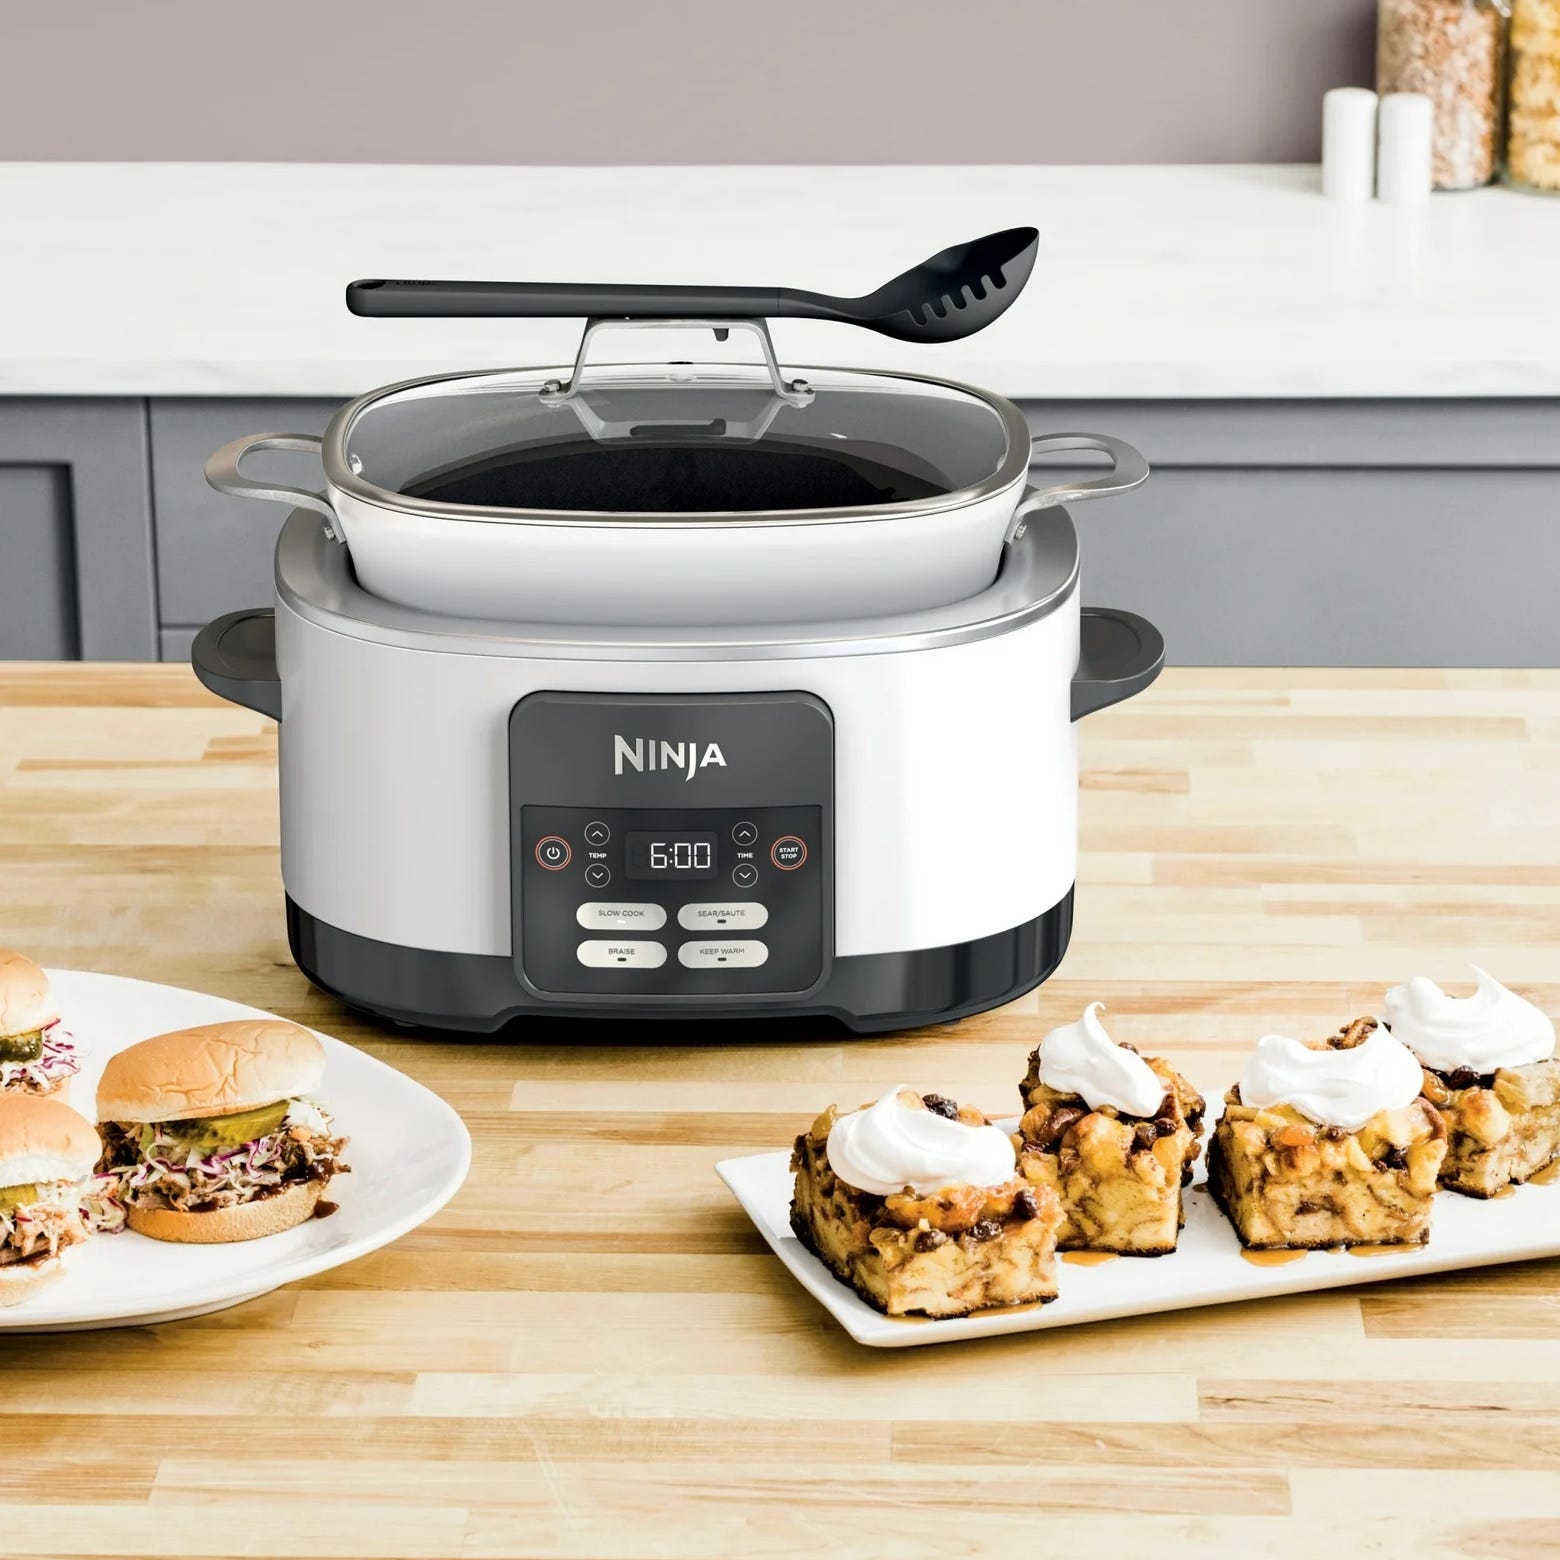 A Ninja multi-cooker on a kitchen counter surrounded by plates of sandwiches and cinnamon rolls.